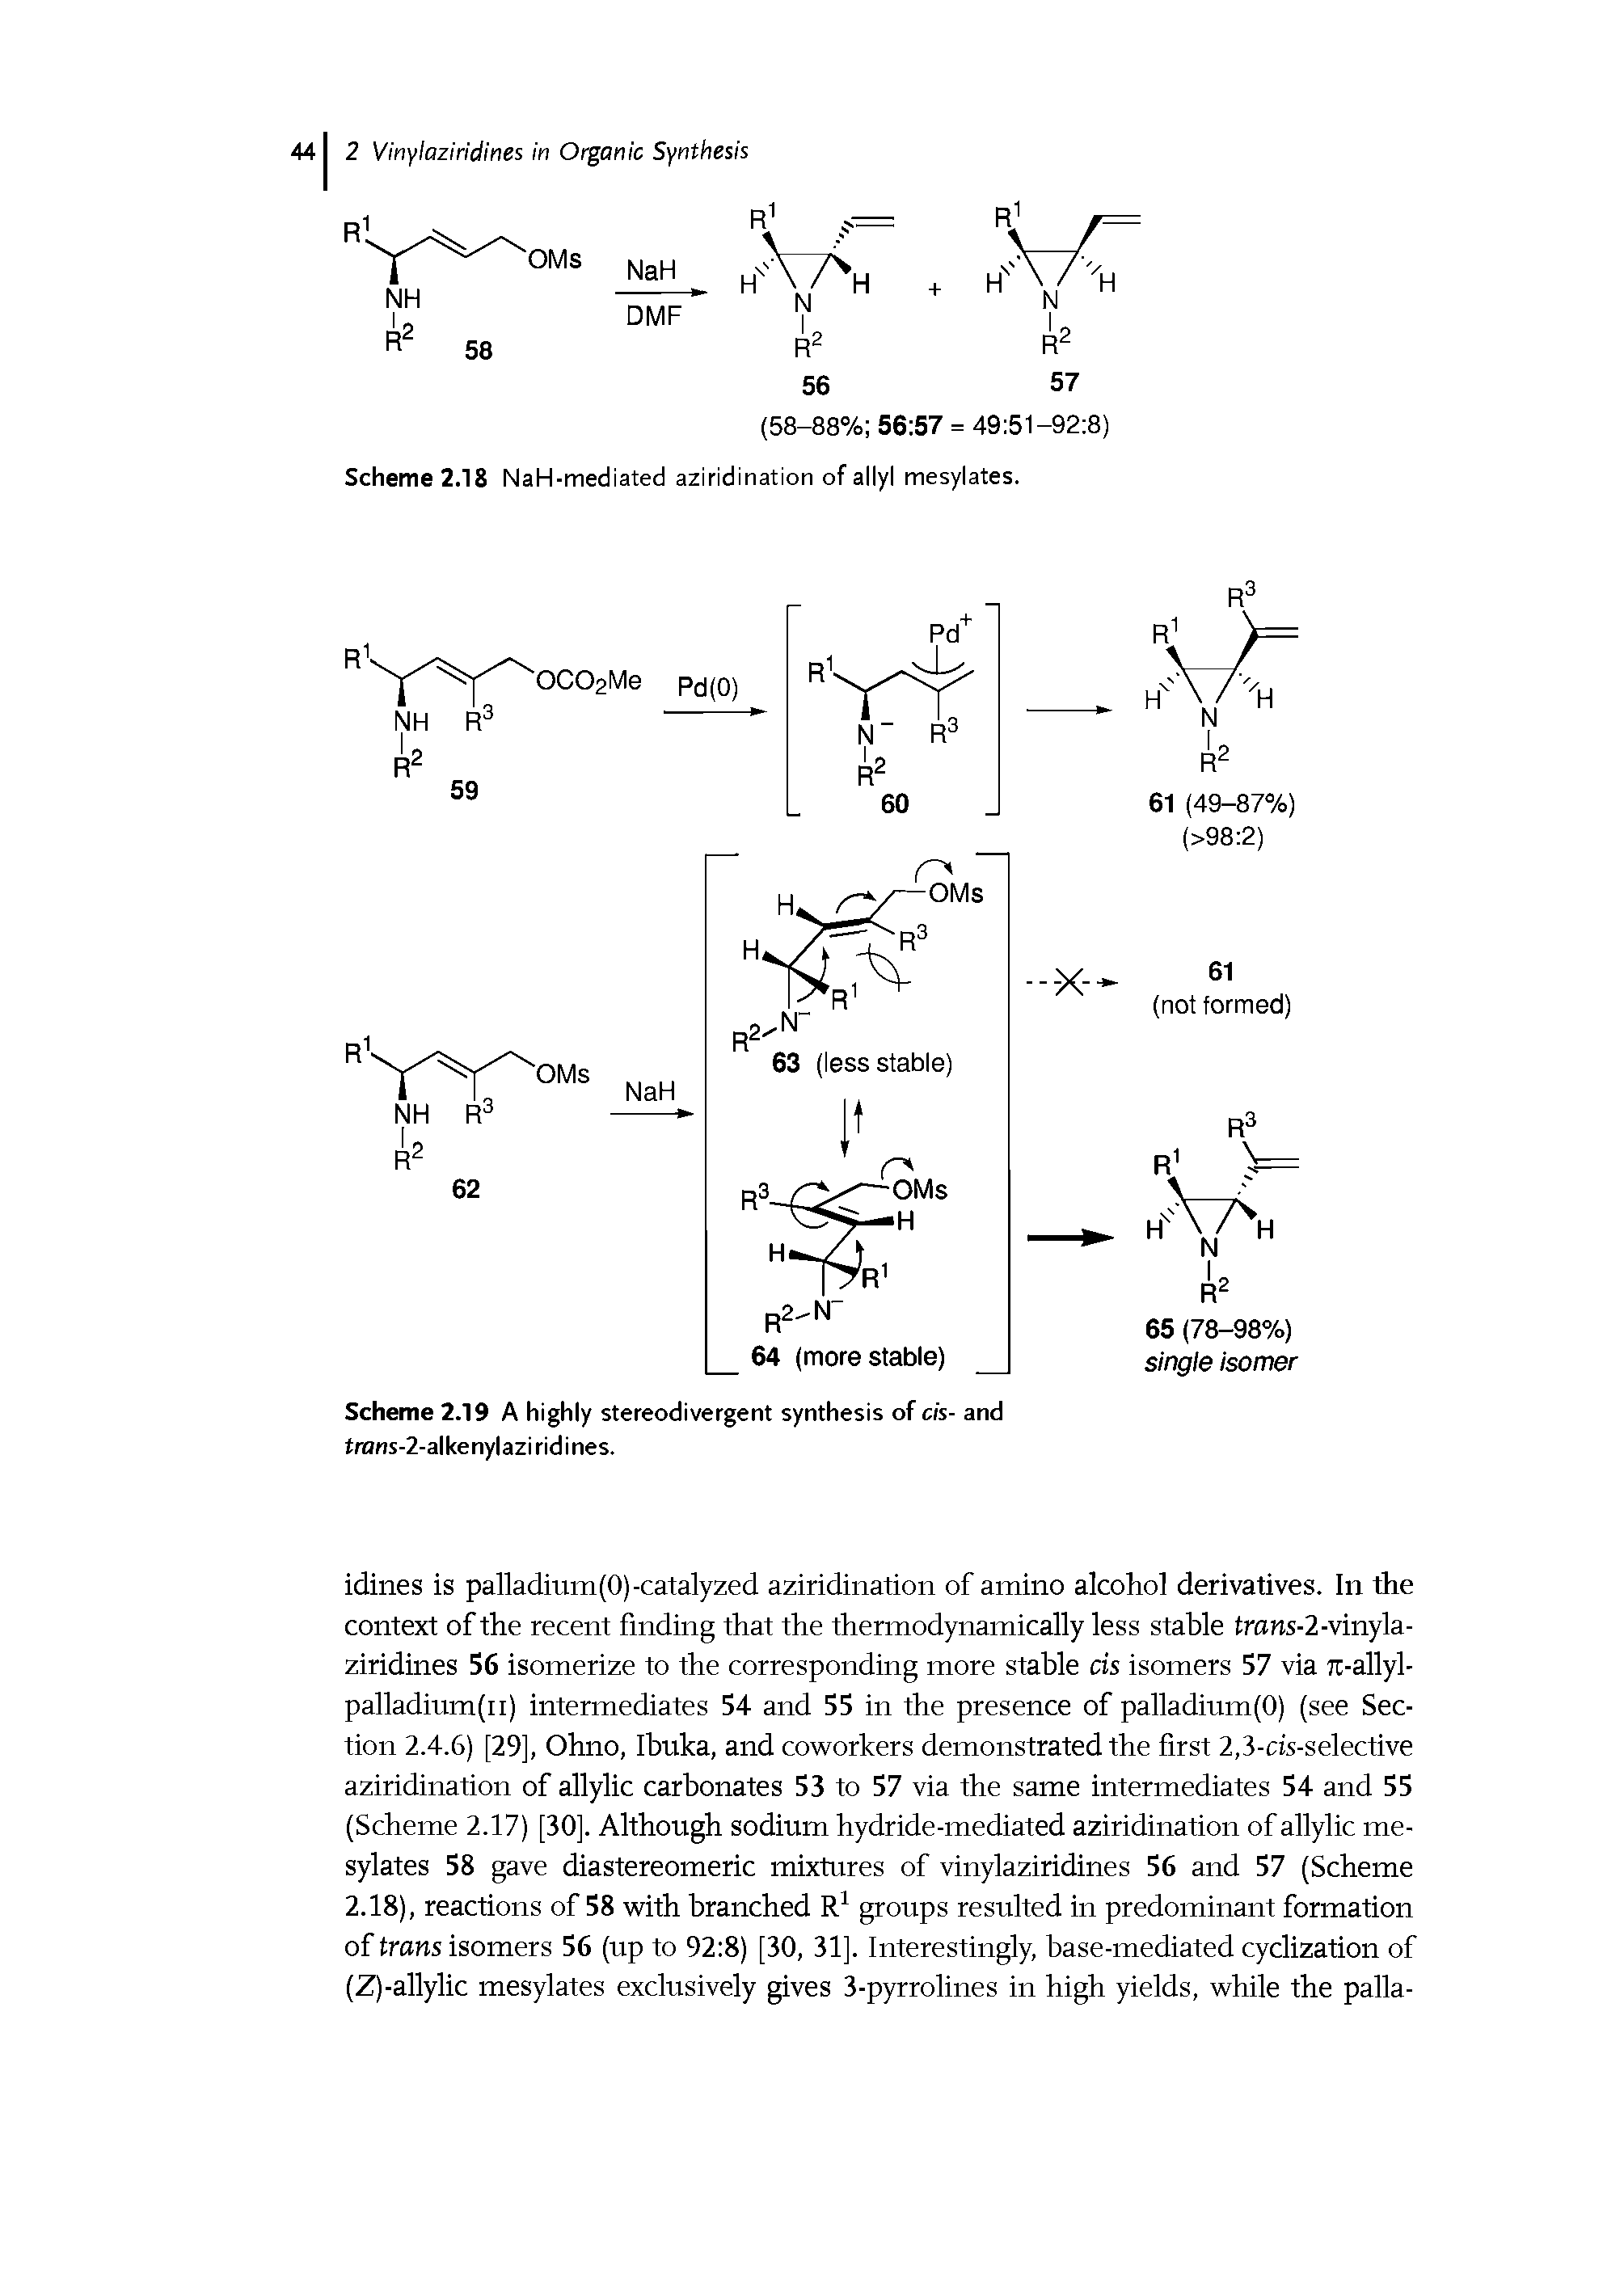 Scheme 2.19 A highly stereodivergent synthesis of cis- and tram-2-alkenylaziridines.